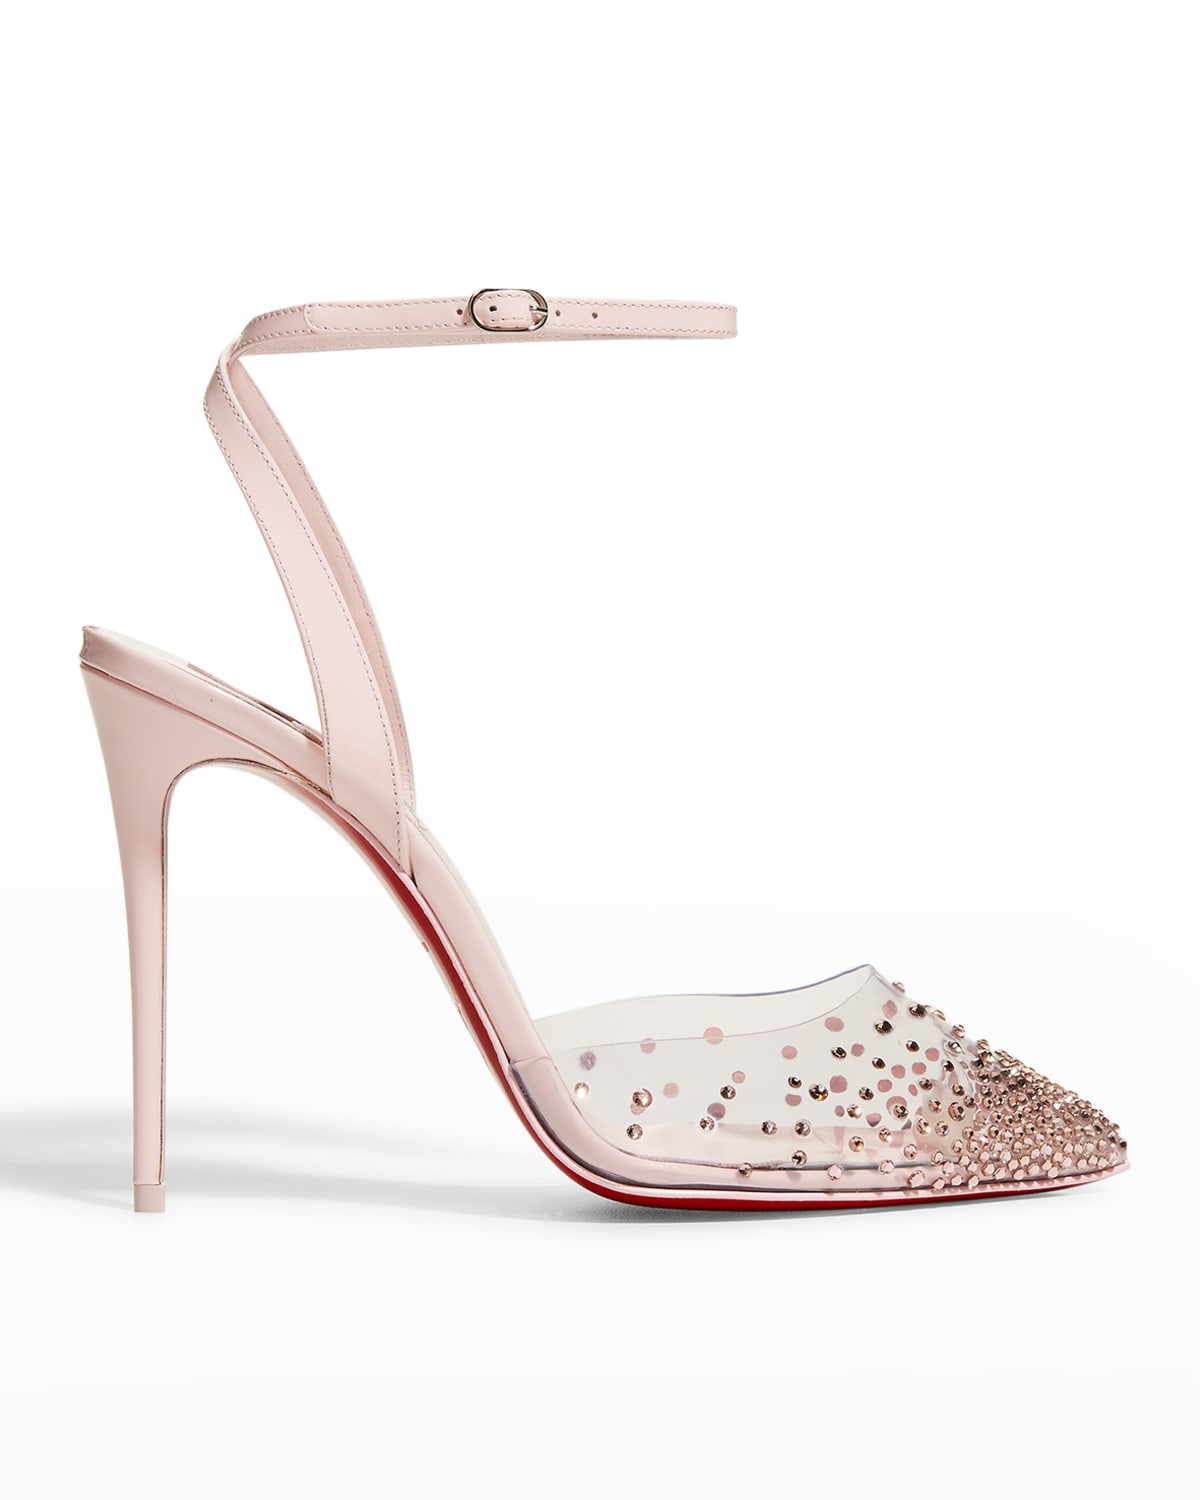 Christian Louboutin Spika Queen Red Sole Ankle-Strap Pumps